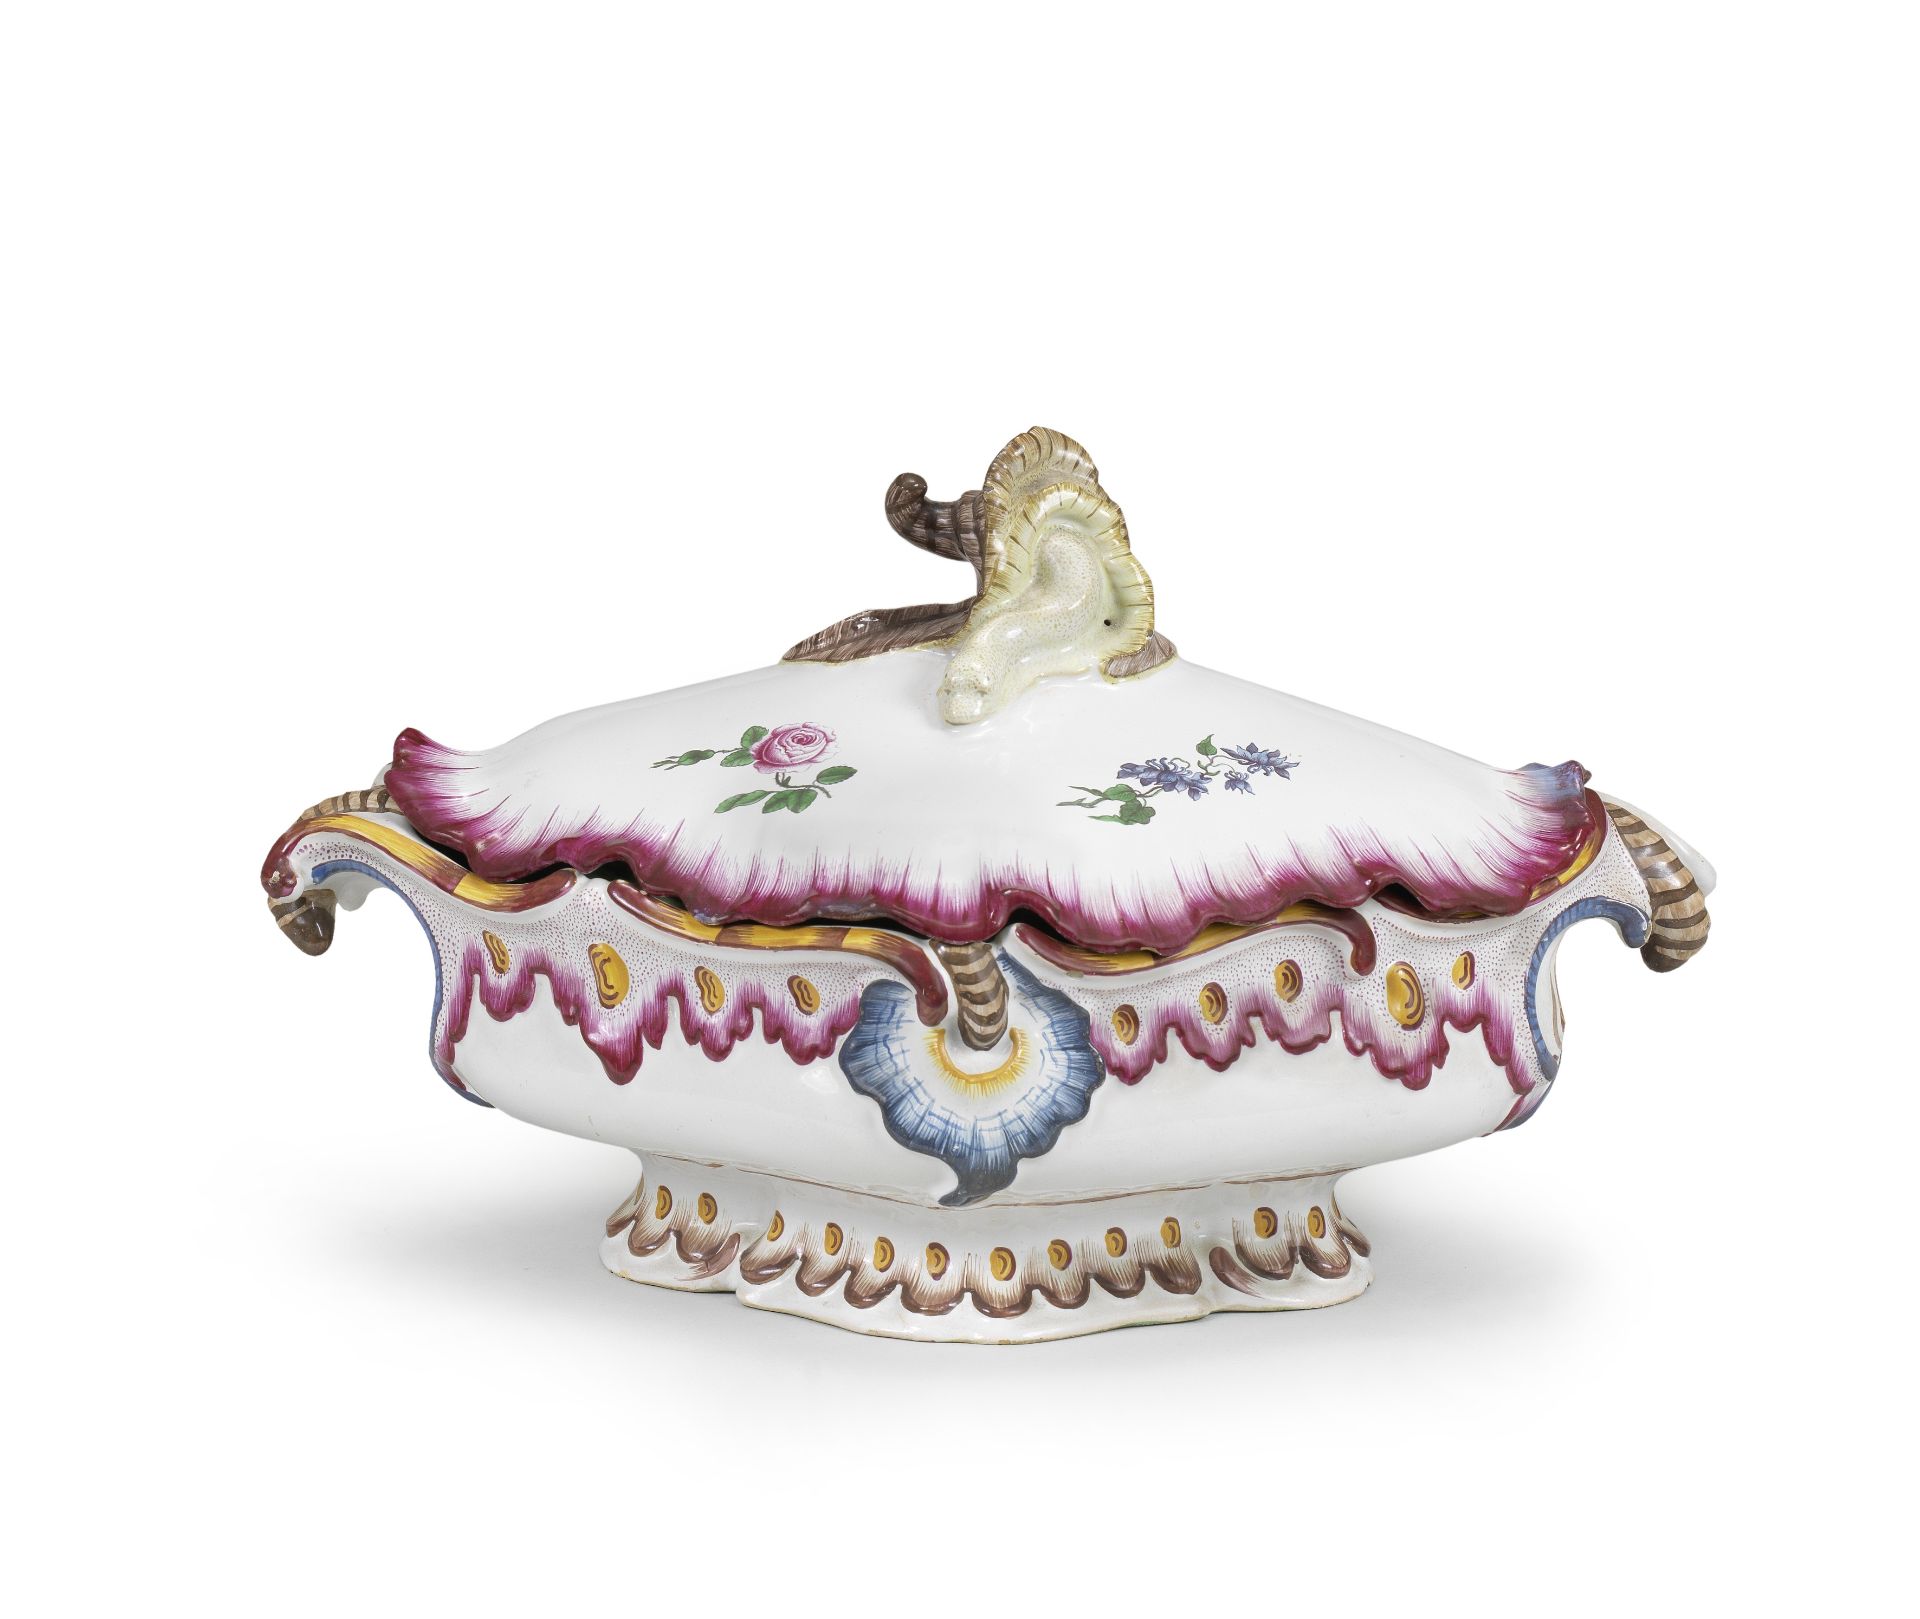 A Strasbourg faience tureen and cover, circa 1750